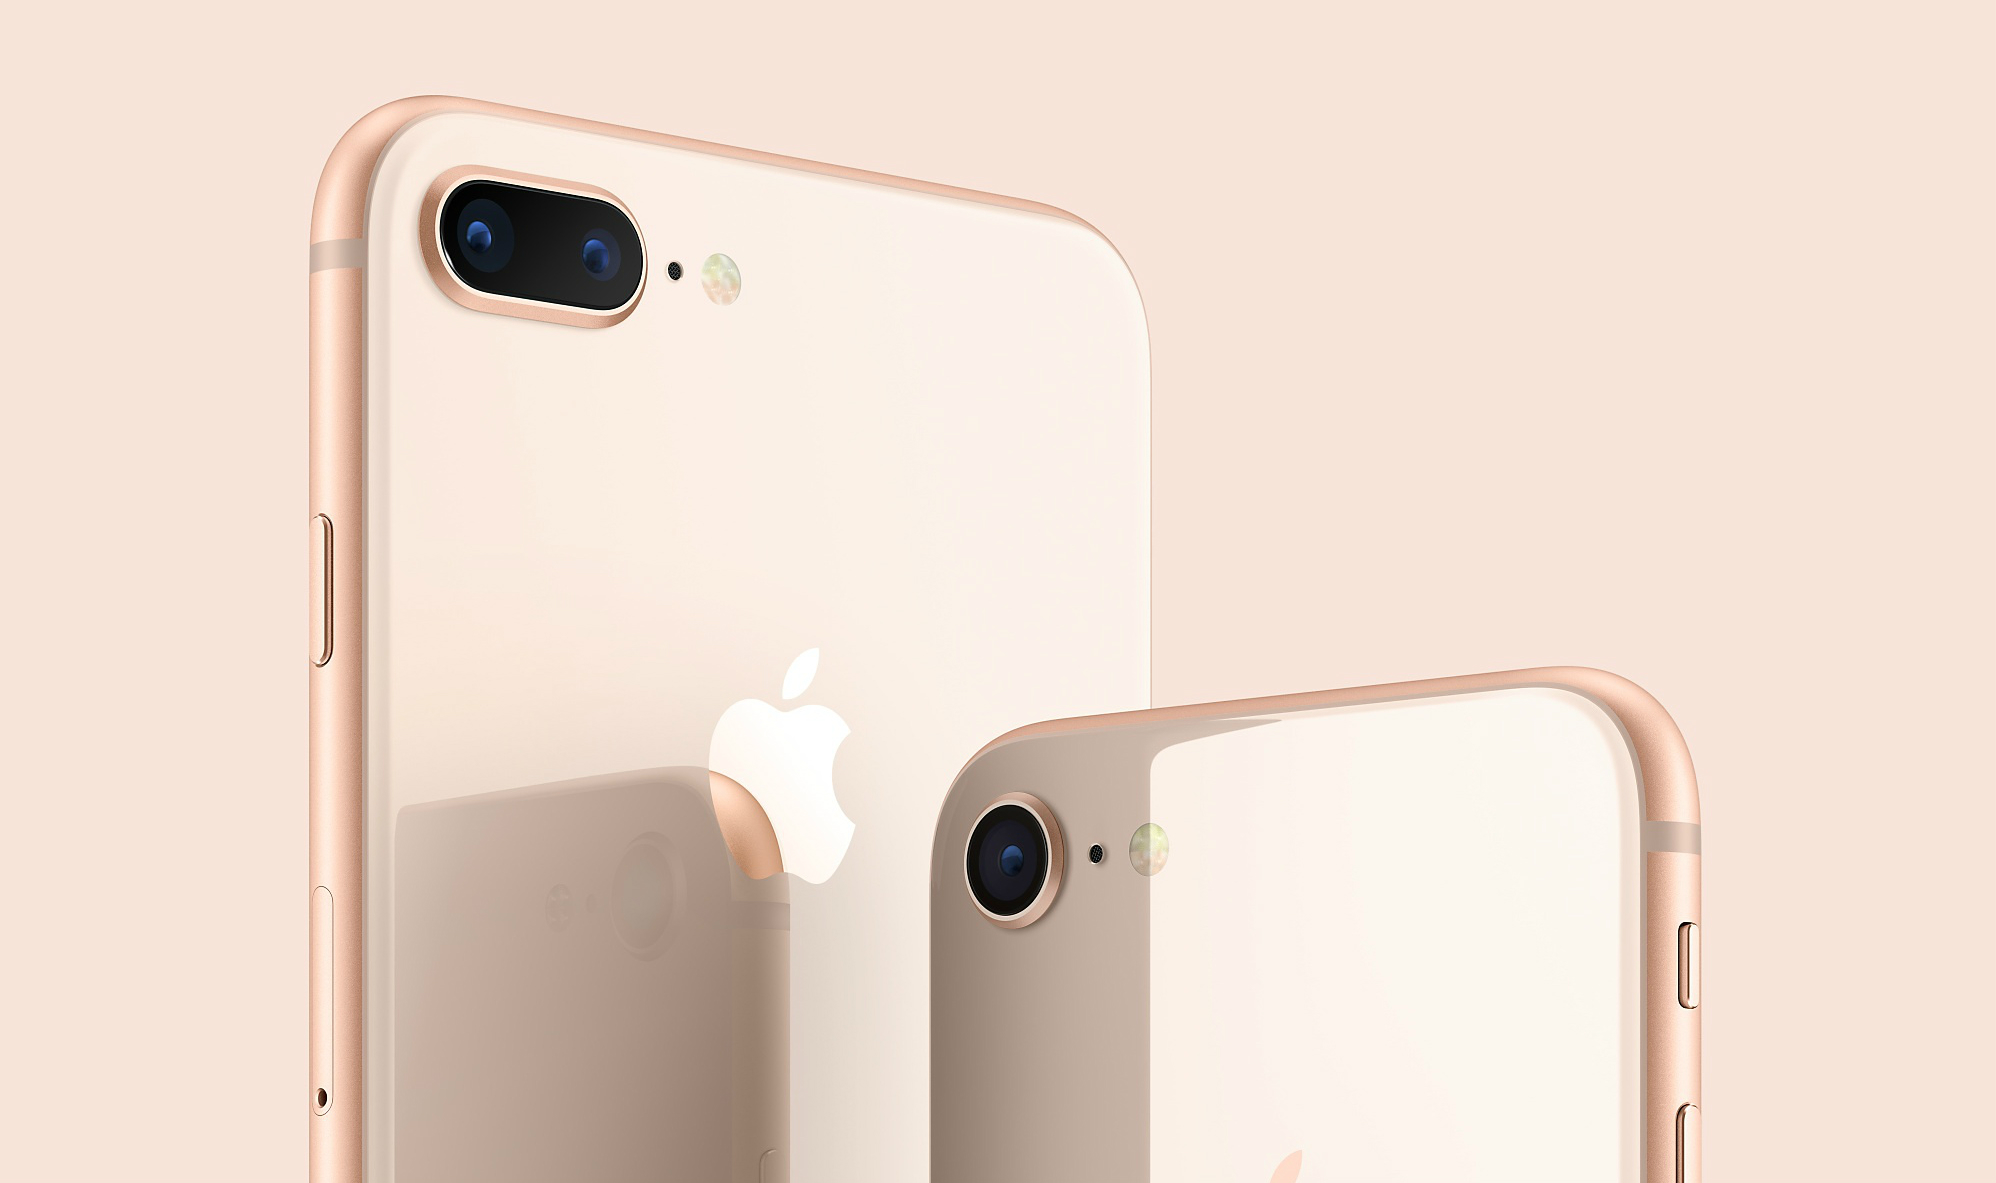 iPhone 8 and 8 Plus became the most popular smartphones in October